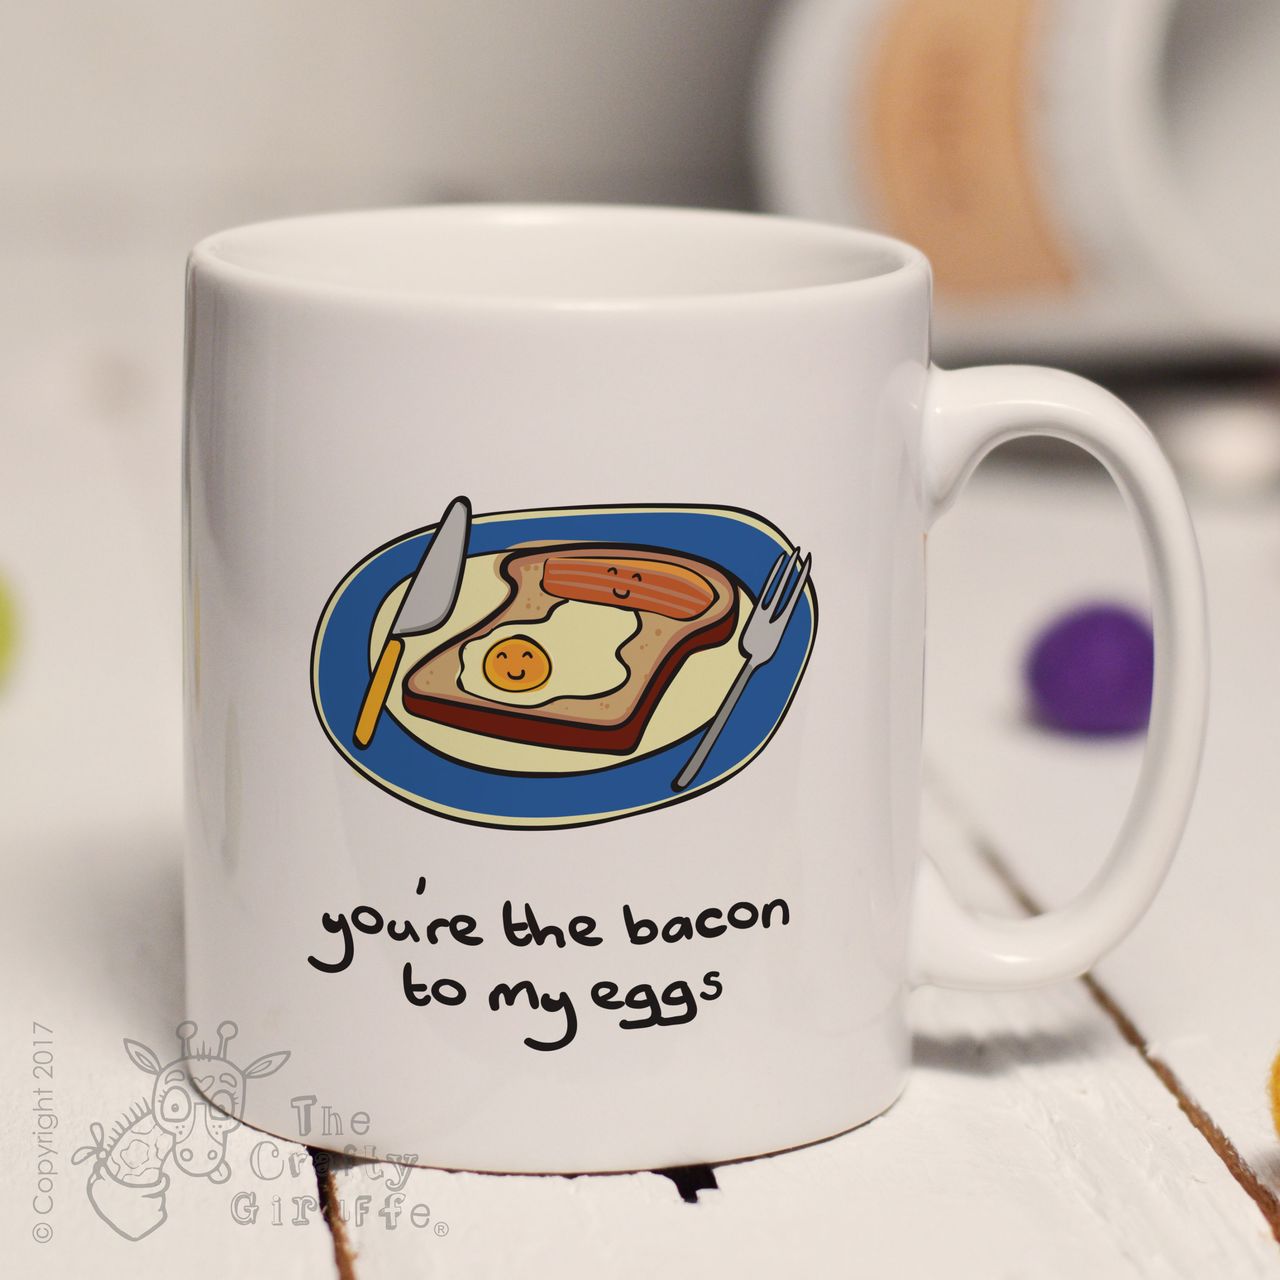 You’re the bacon to my eggs mug